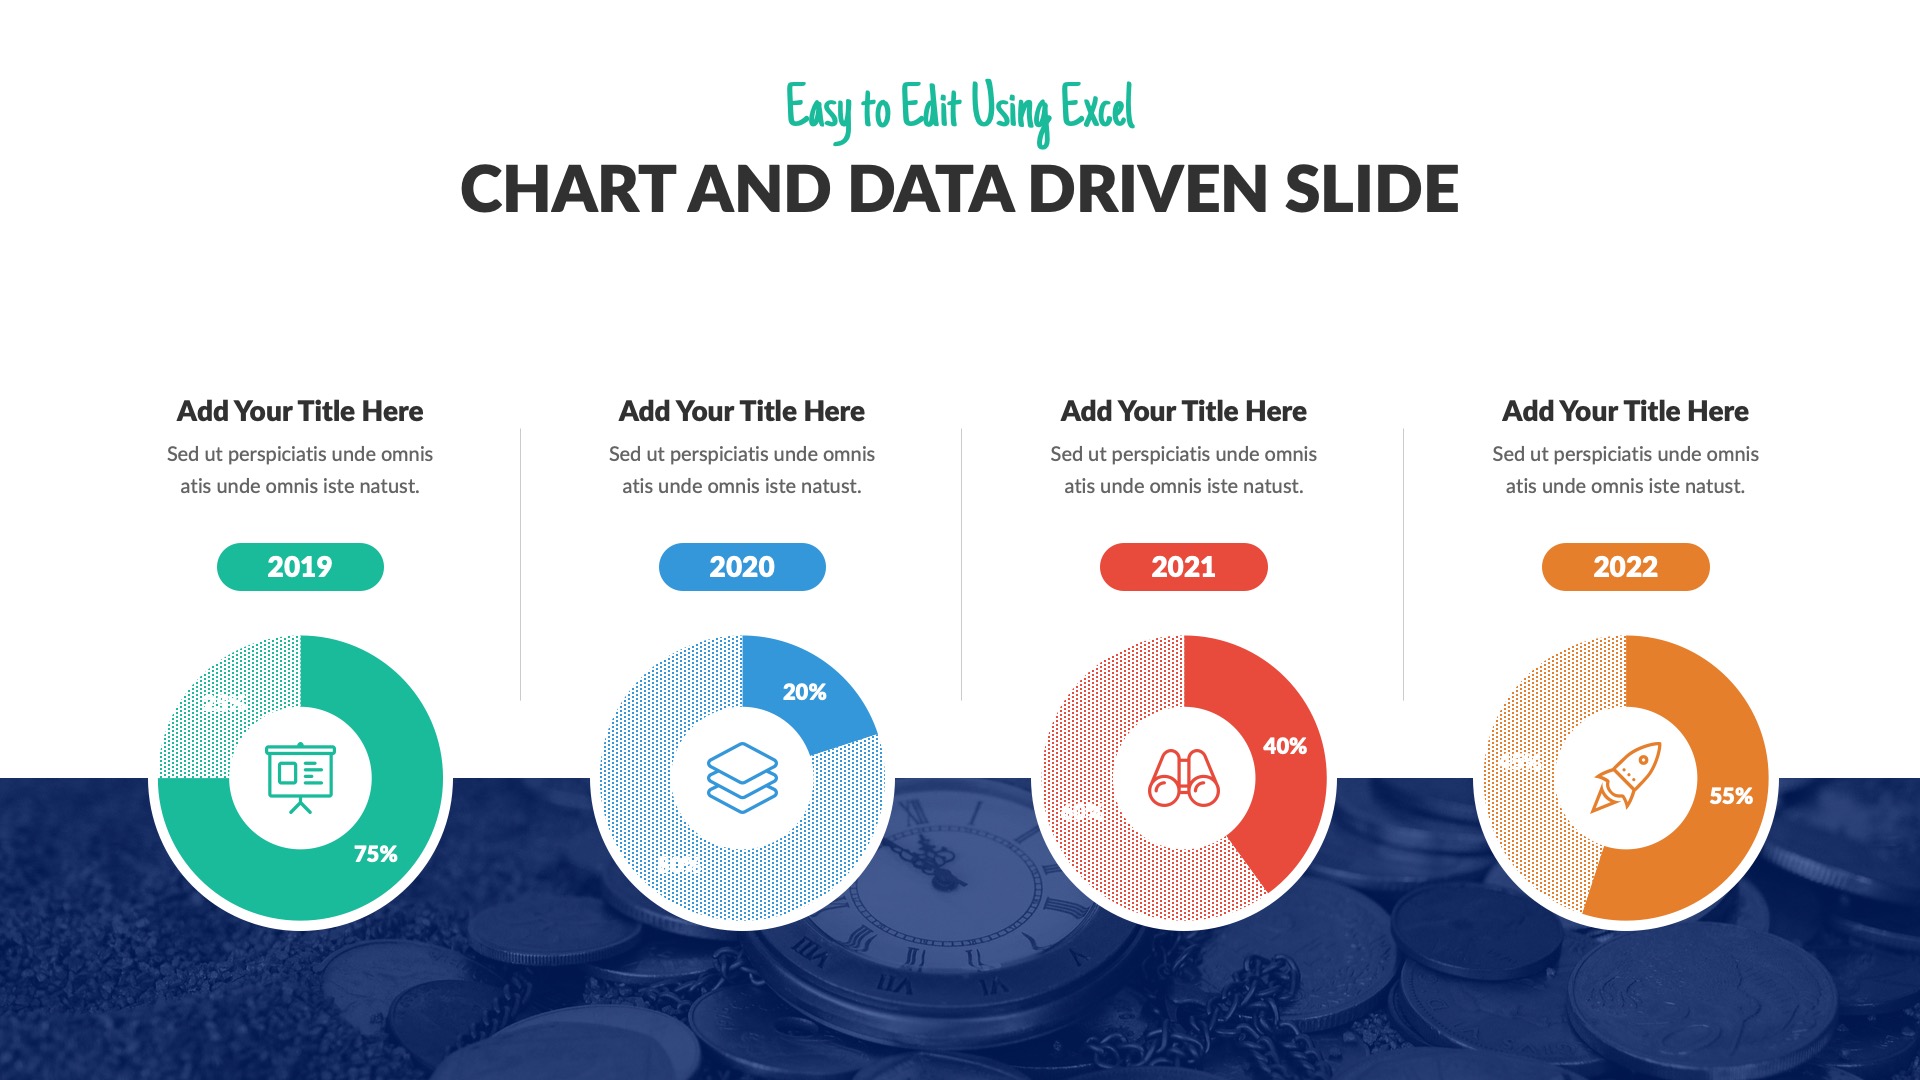 Chart and Data Driven 2 PowerPoint Presentation Template by Spriteit